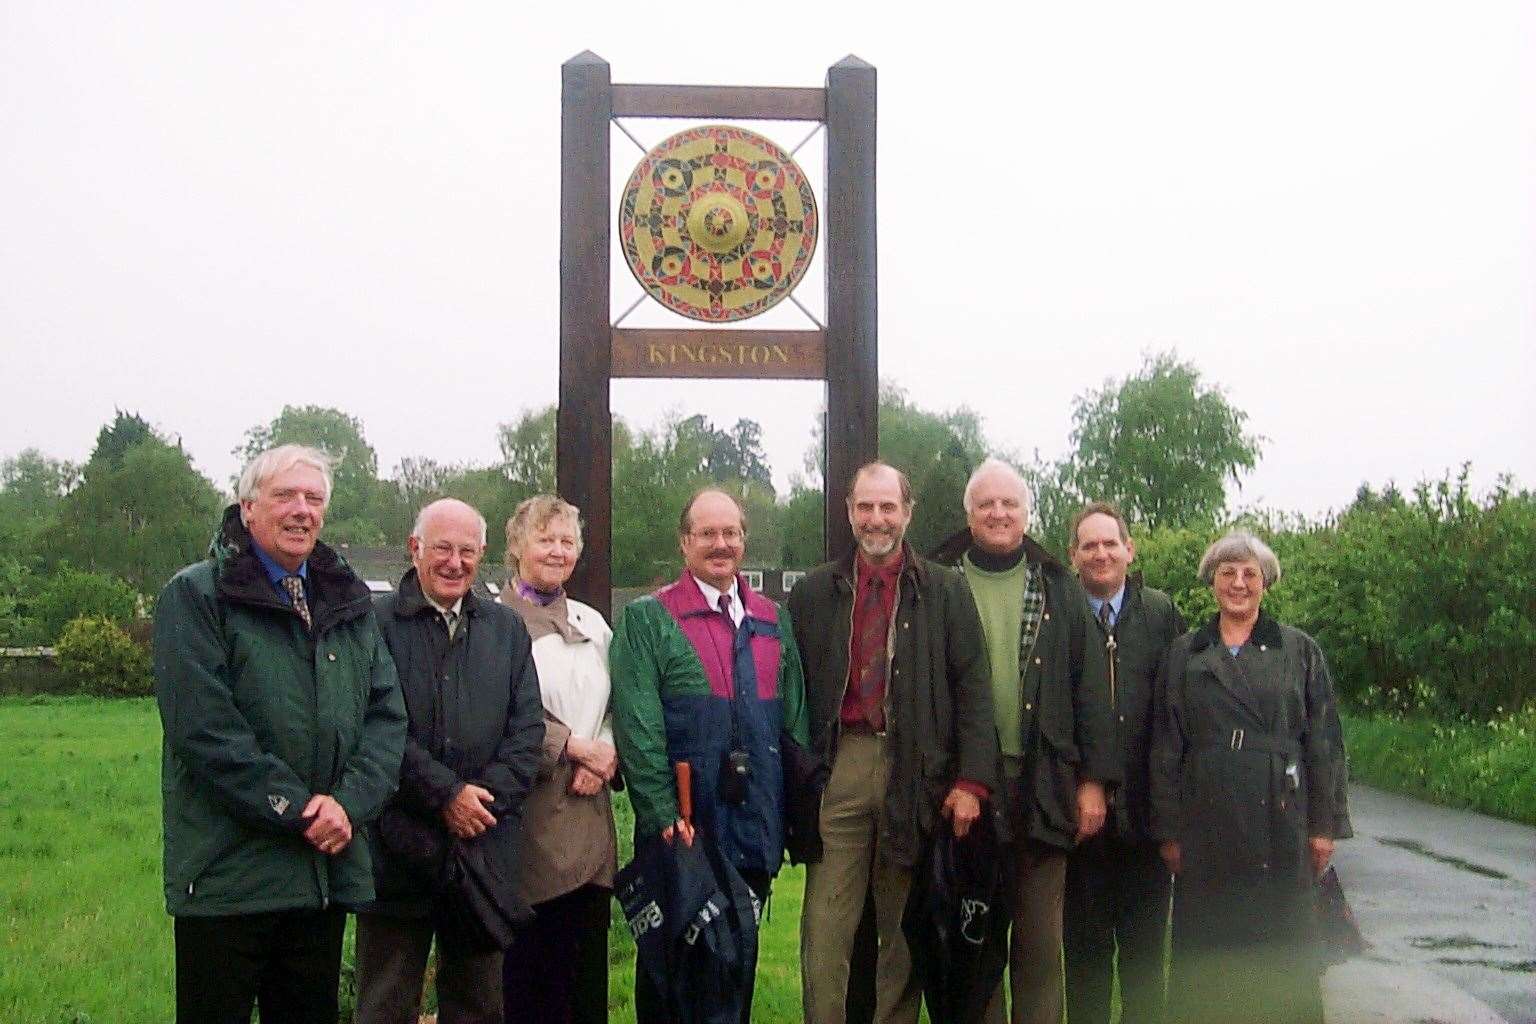 Kingston’s new village sign in honour of the brooch was unveiled in 2002